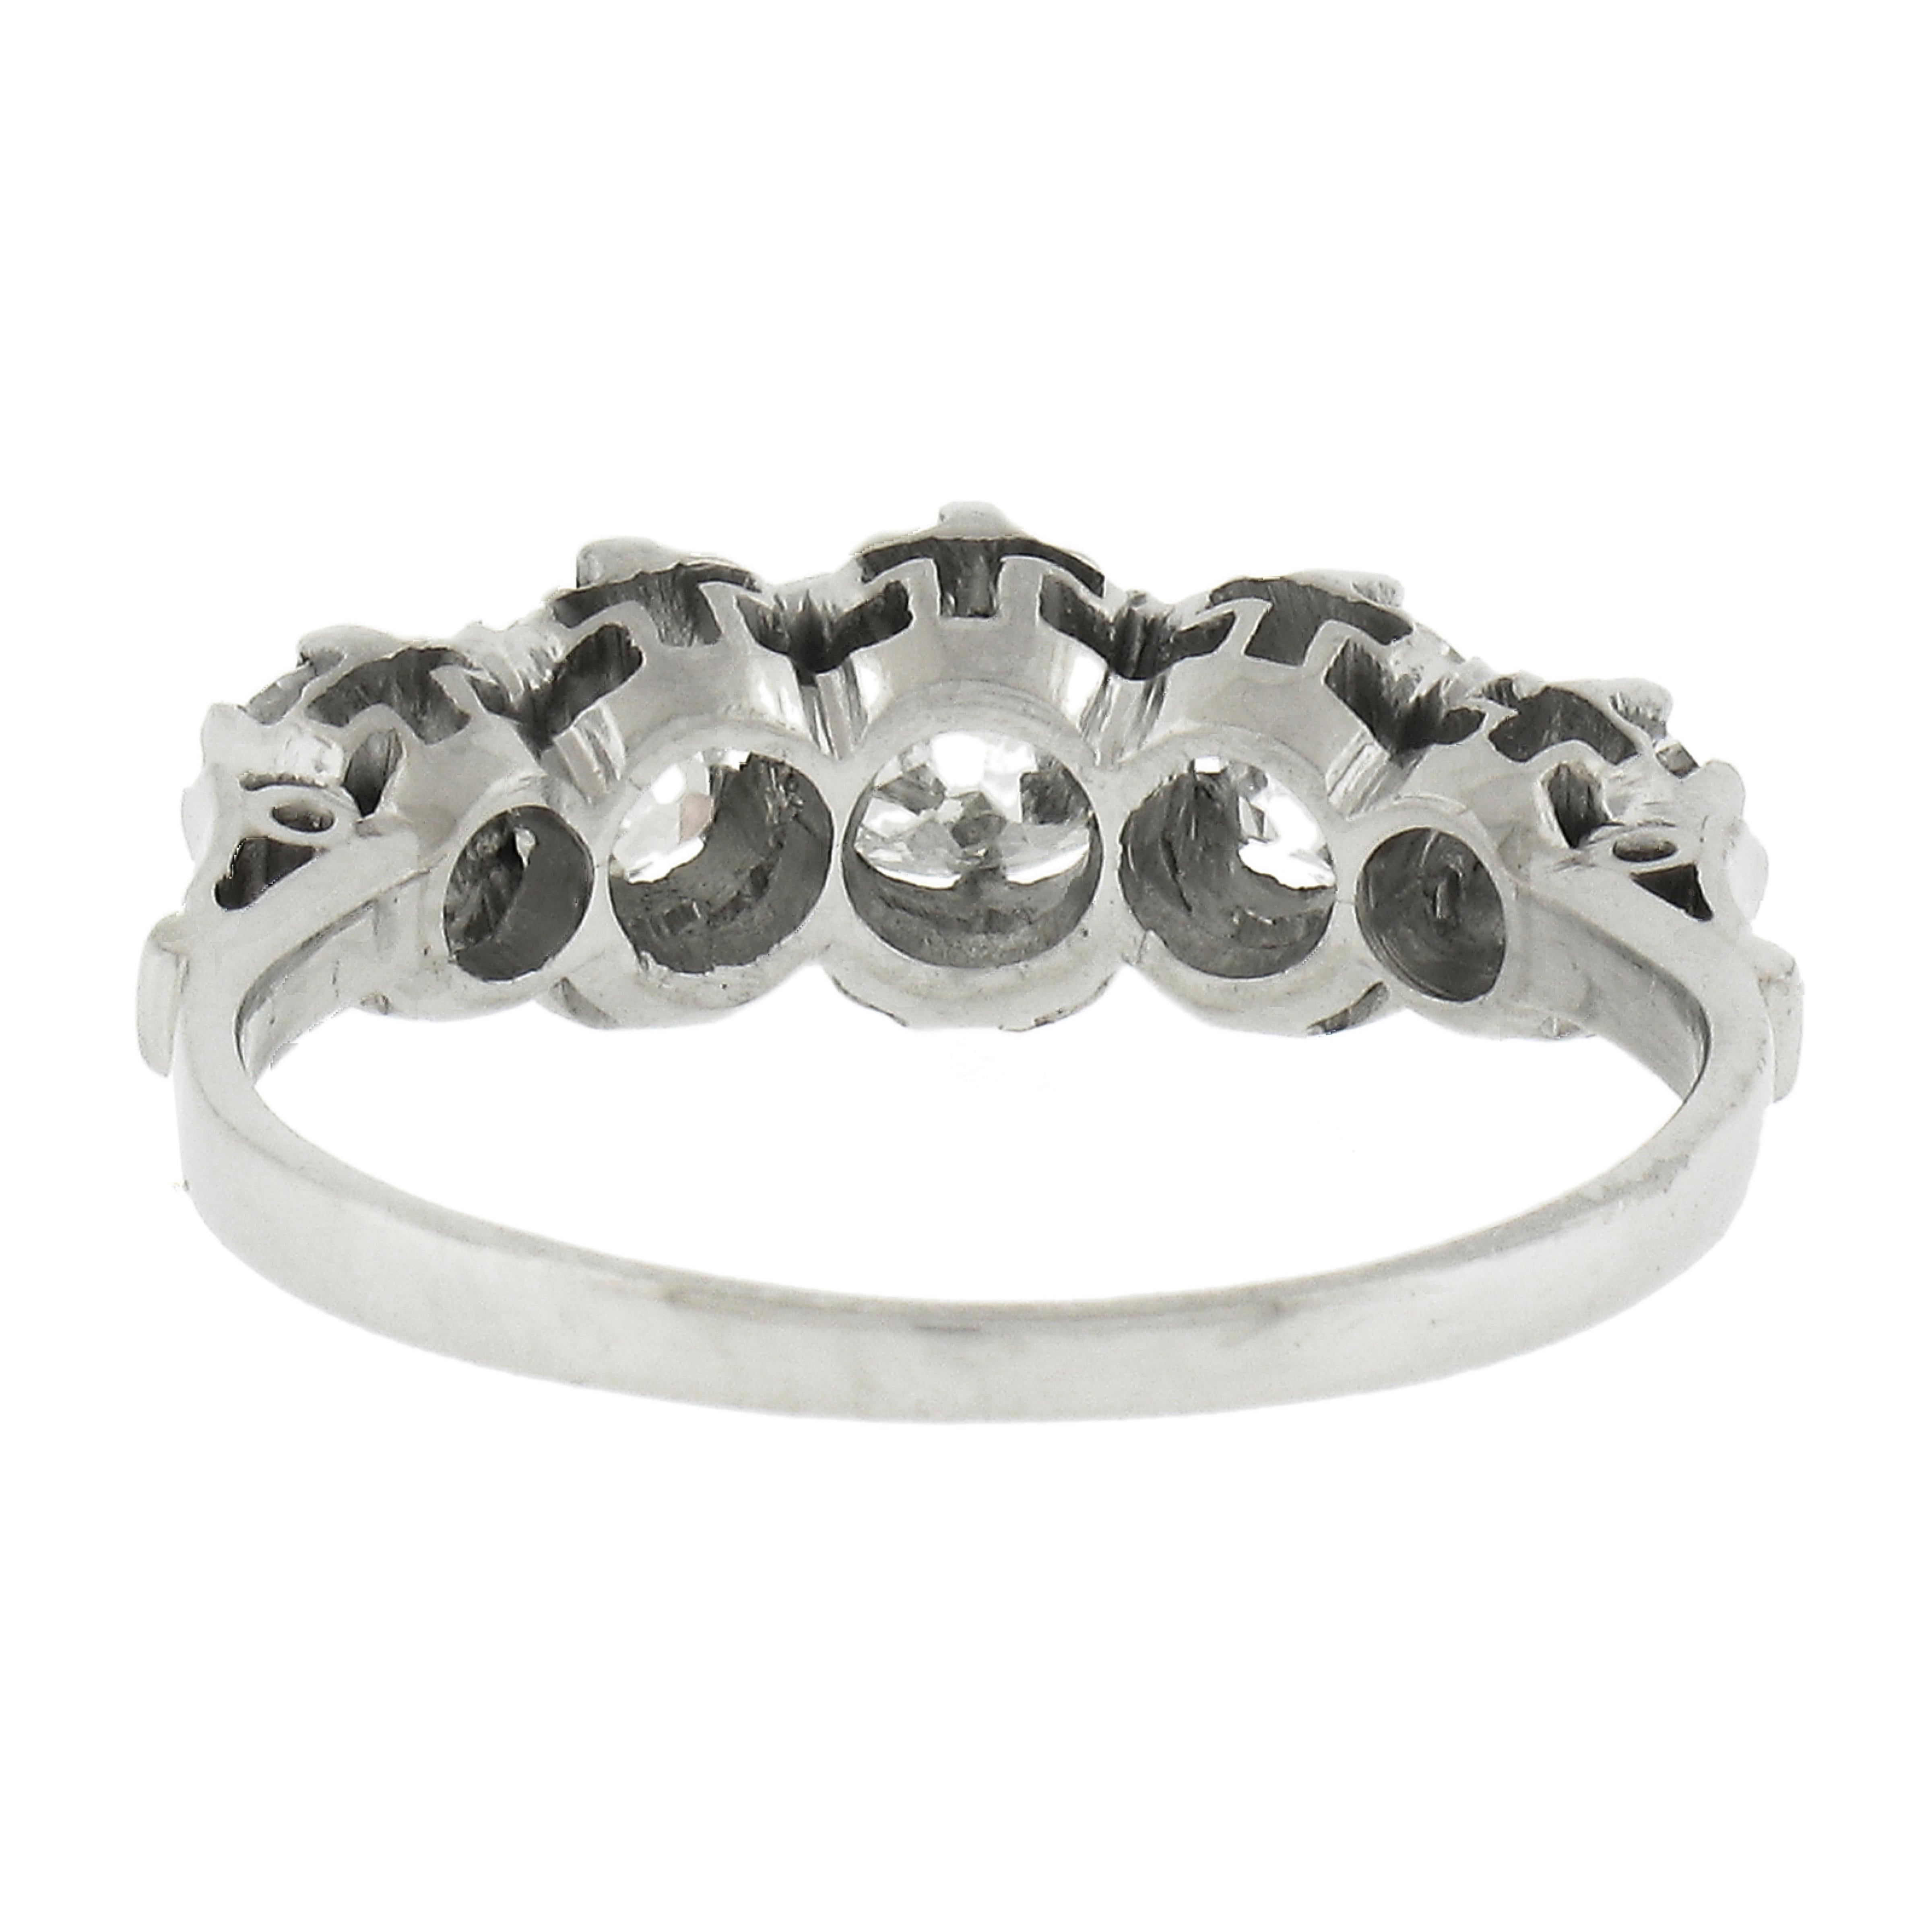 Antique Edwardian Platinum GIA Graded 1.15ct Diamond Stackable 5 Stone Band Ring For Sale 2